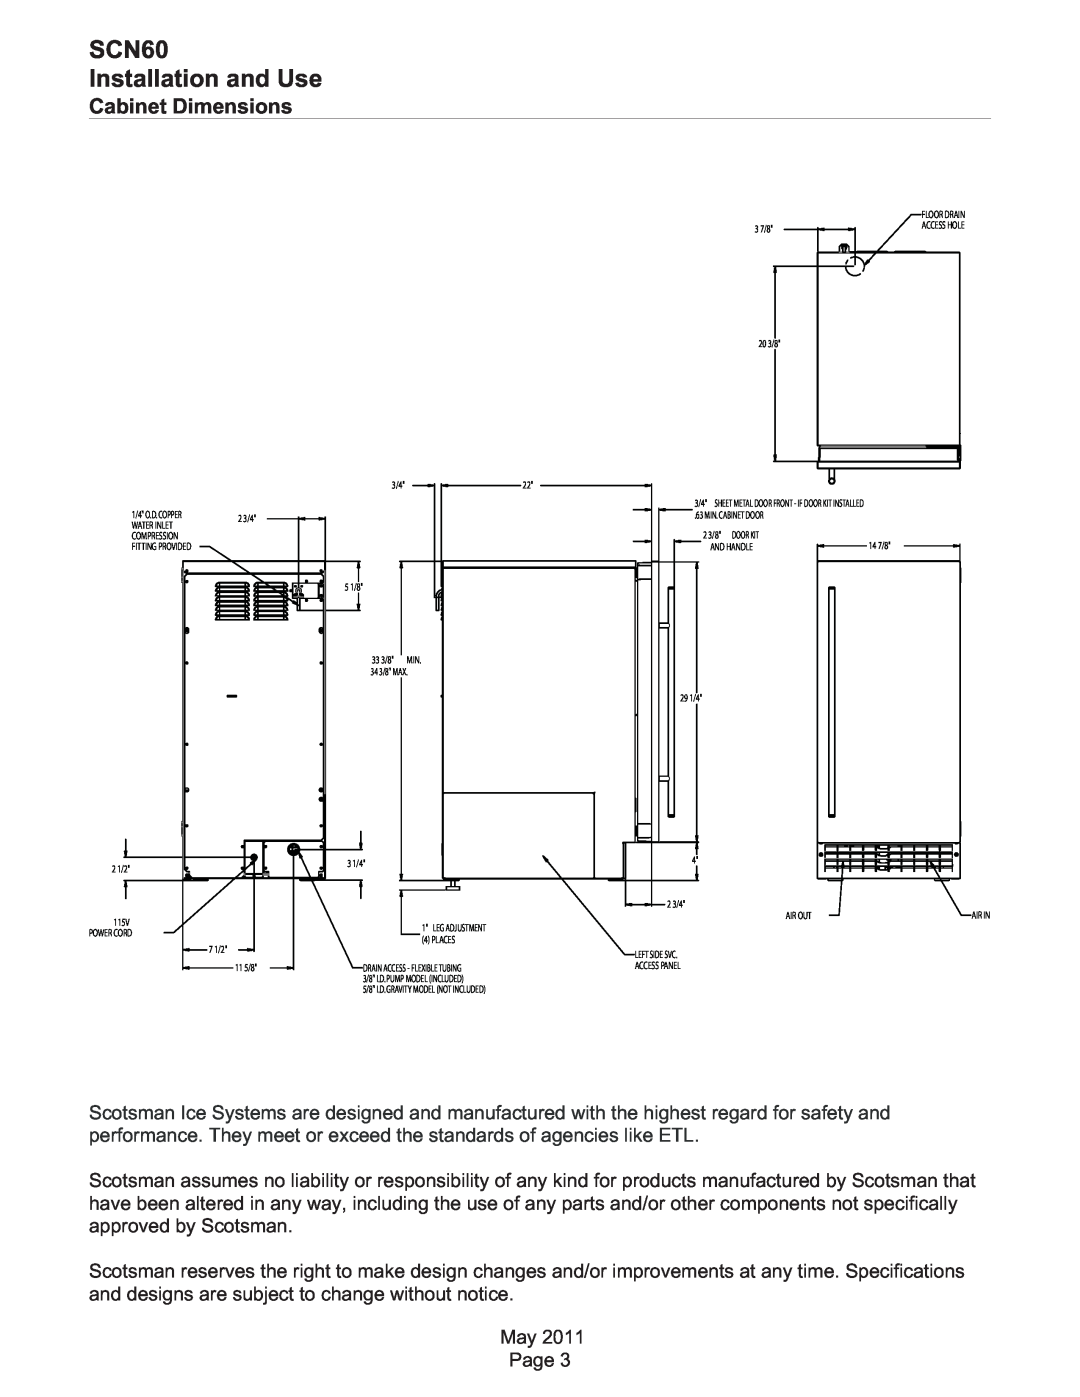 Scotsman Ice dimensions Cabinet Dimensions, SCN60 Installation and Use, Water Inlet, Drain Access - Flexible Tubing 